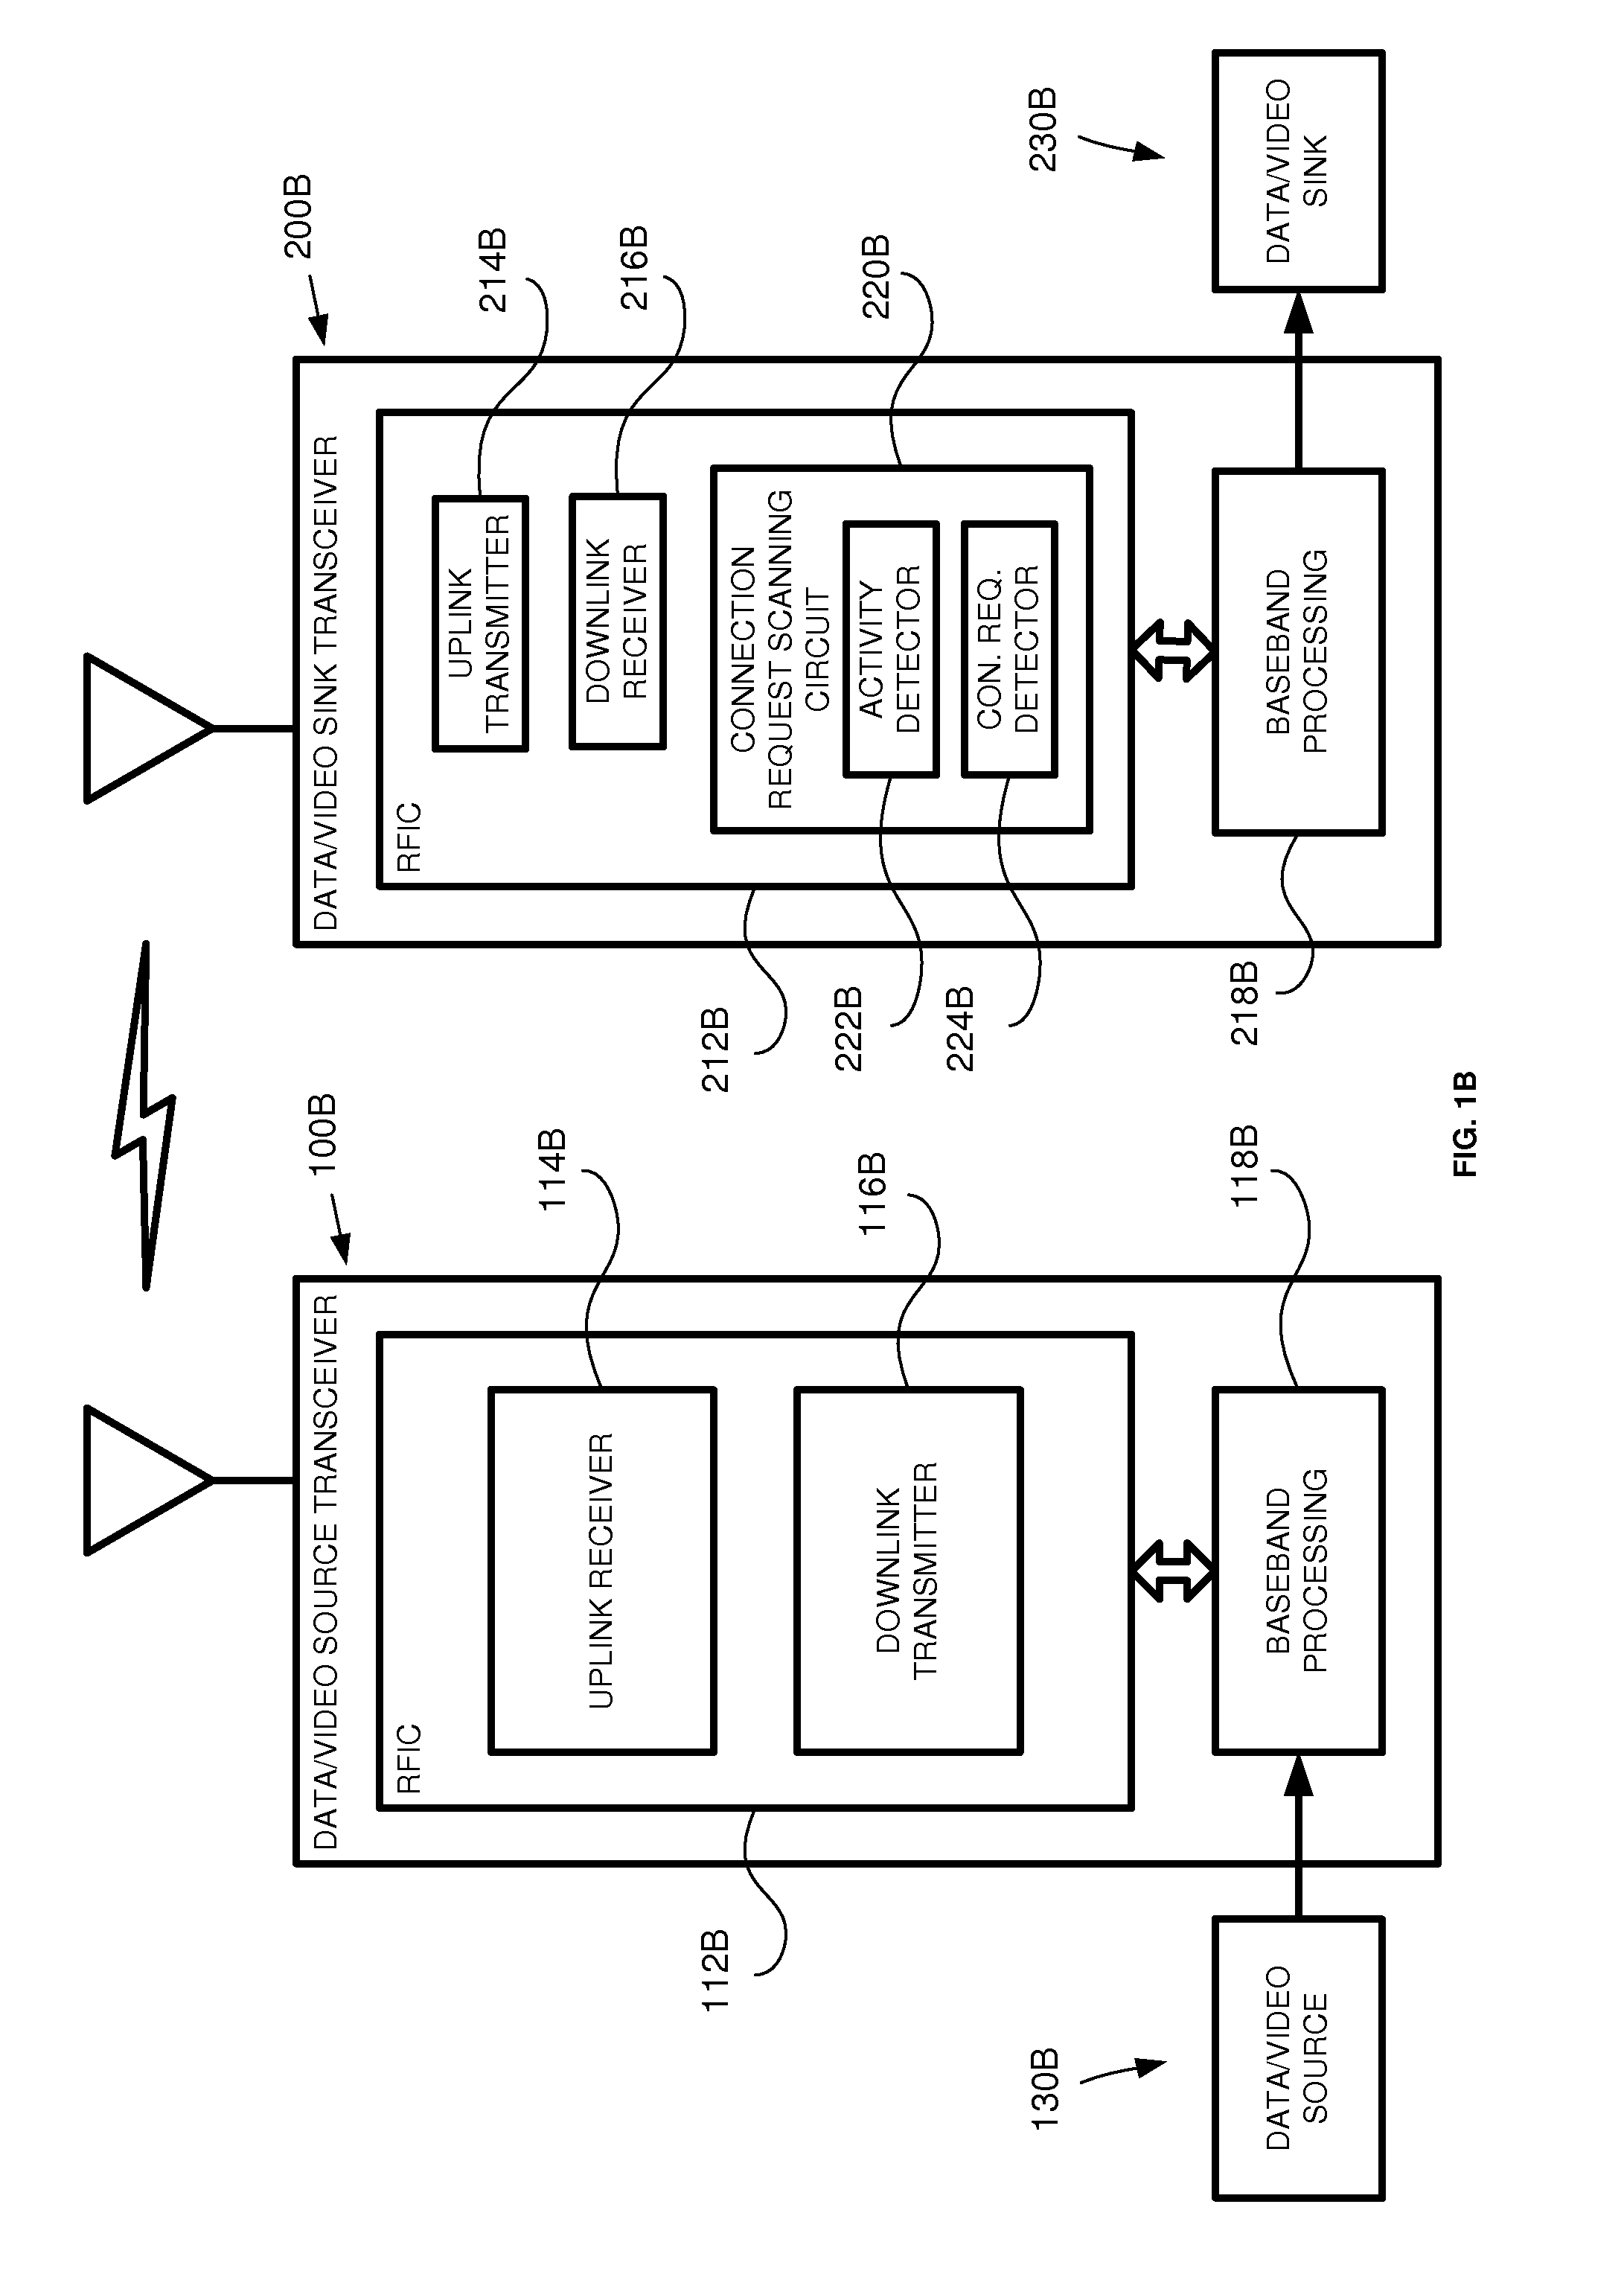 Method circuit and system for detecting a connection request while maintaining a low power mode